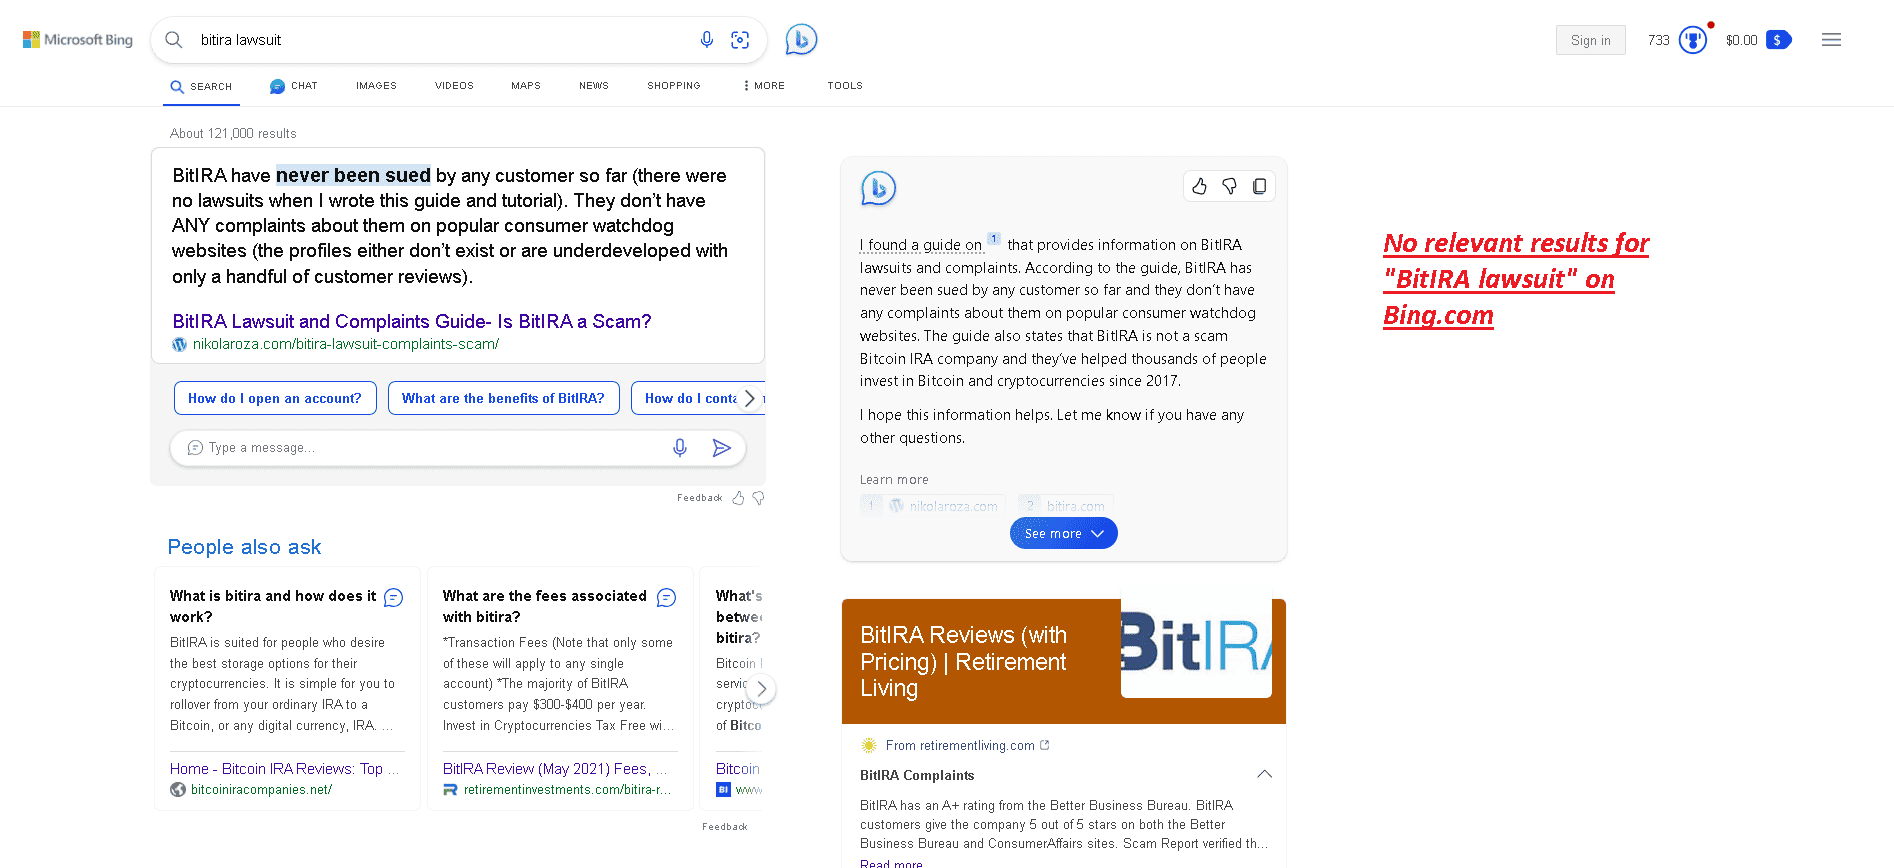 No relevant results on Bing.com about BitIRA lawsuits